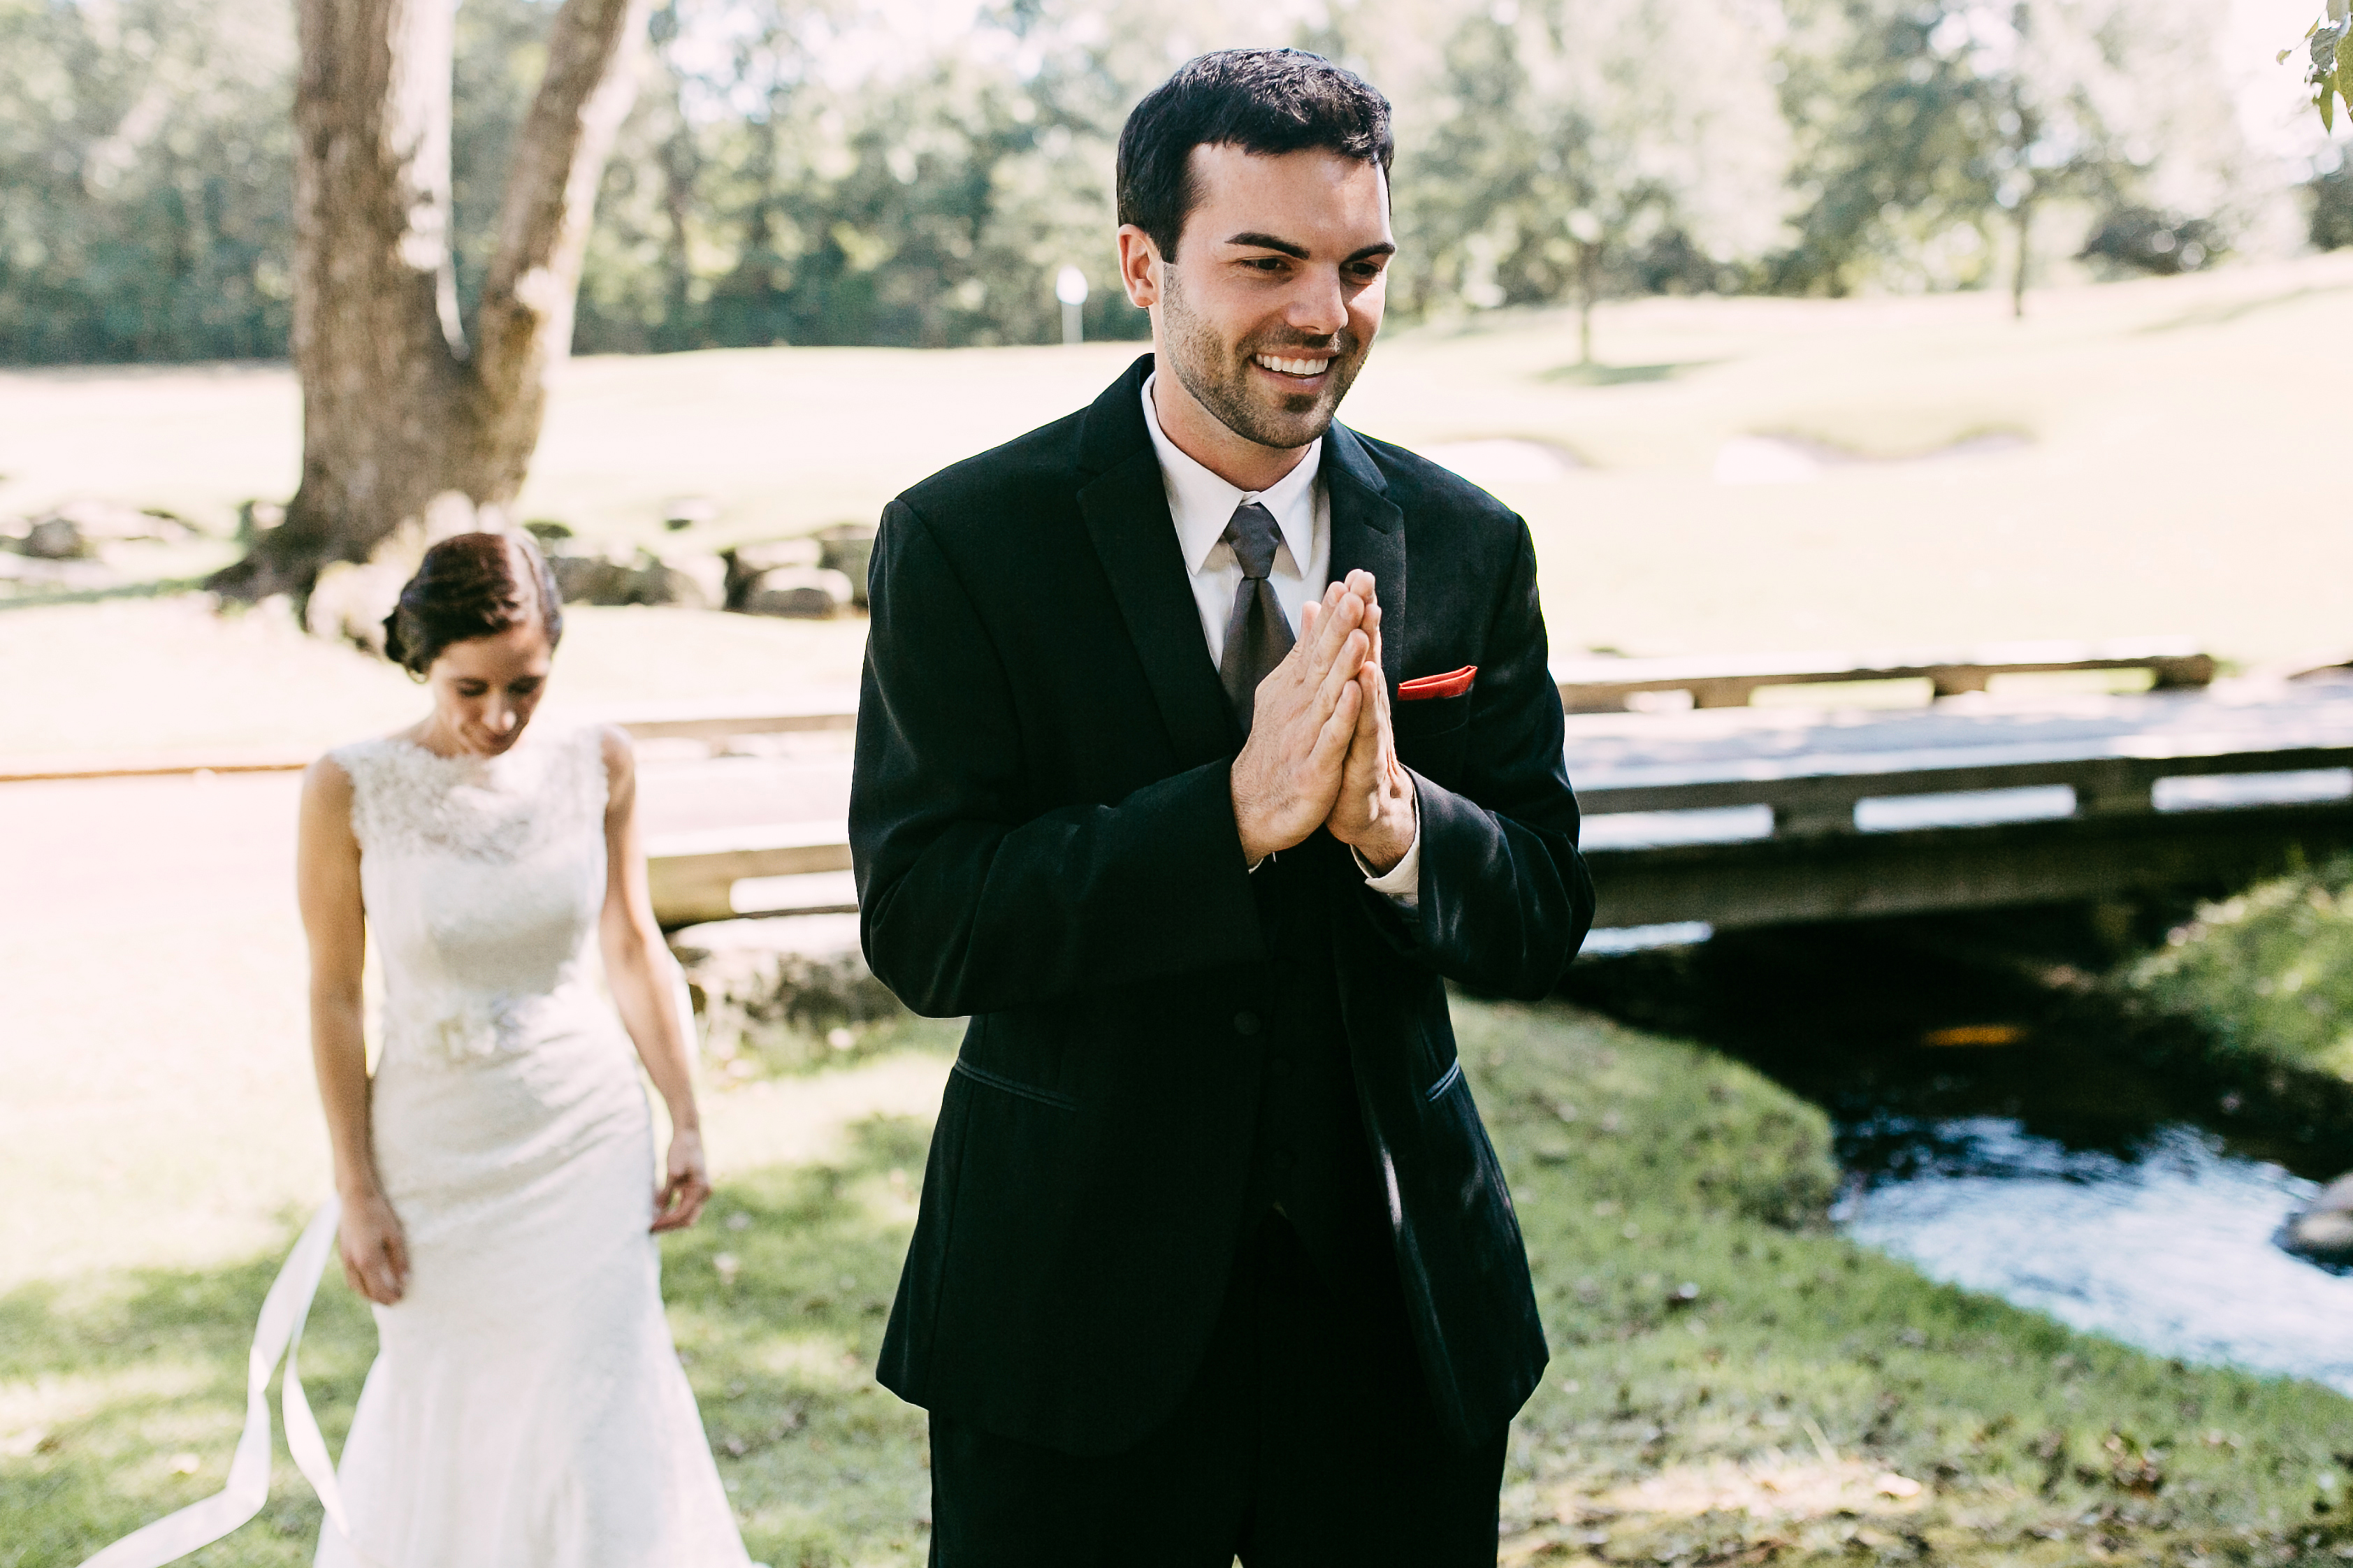 emotional-first-look-with-groom-intimate-wedding-photography